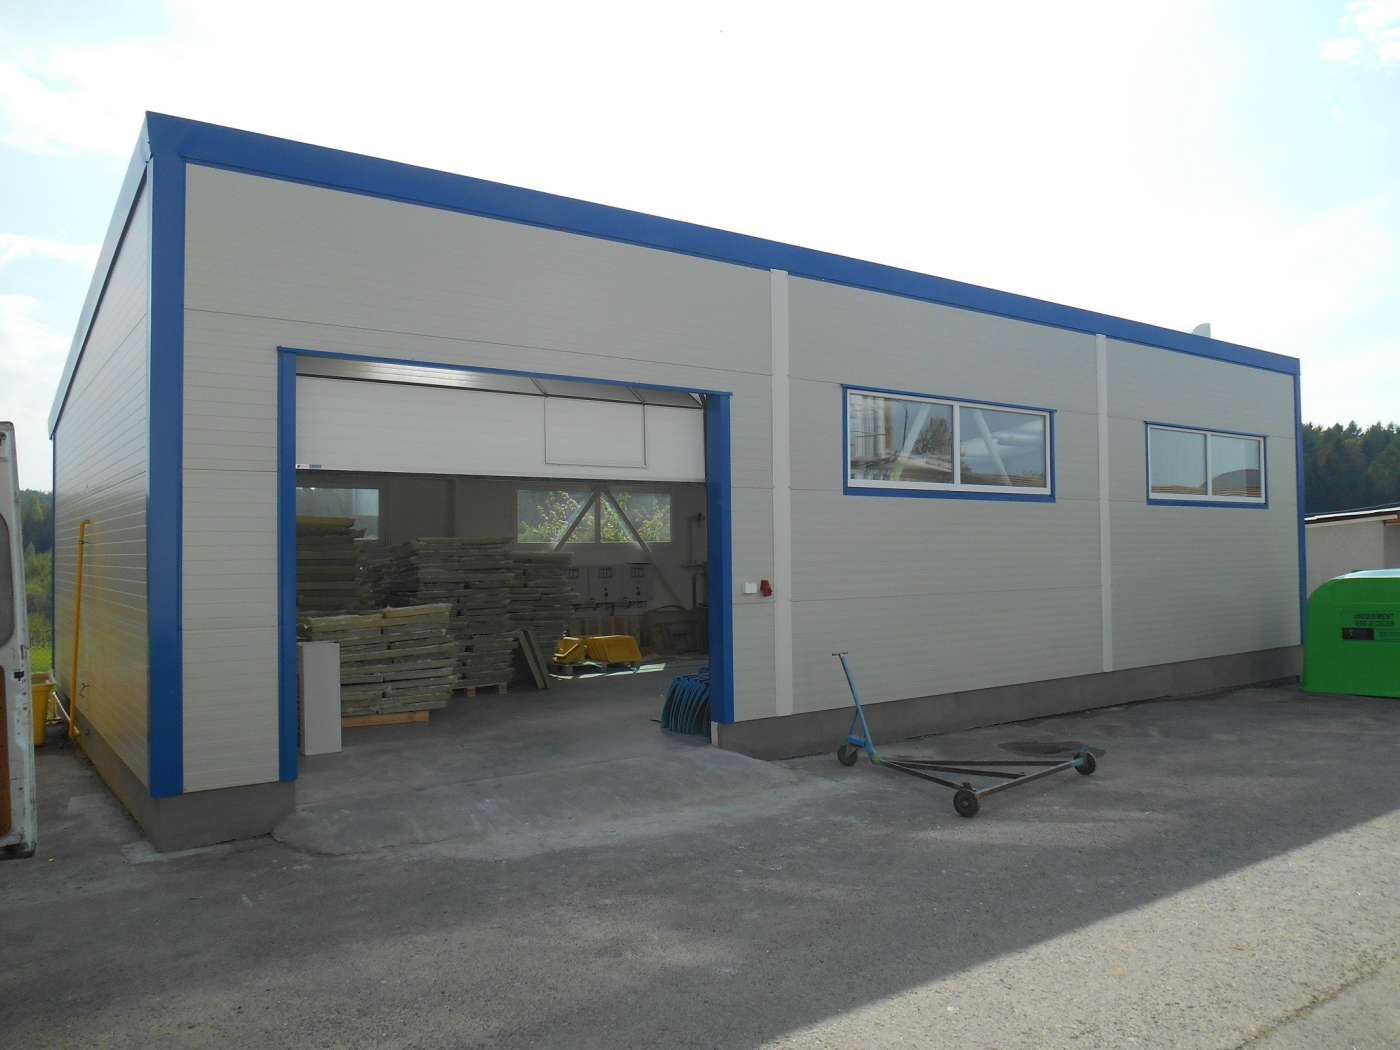 WORKPLACE FOR THE PRODUCTION OF FIBREGLASS PRODUCTS 7 X 18 X 4 M